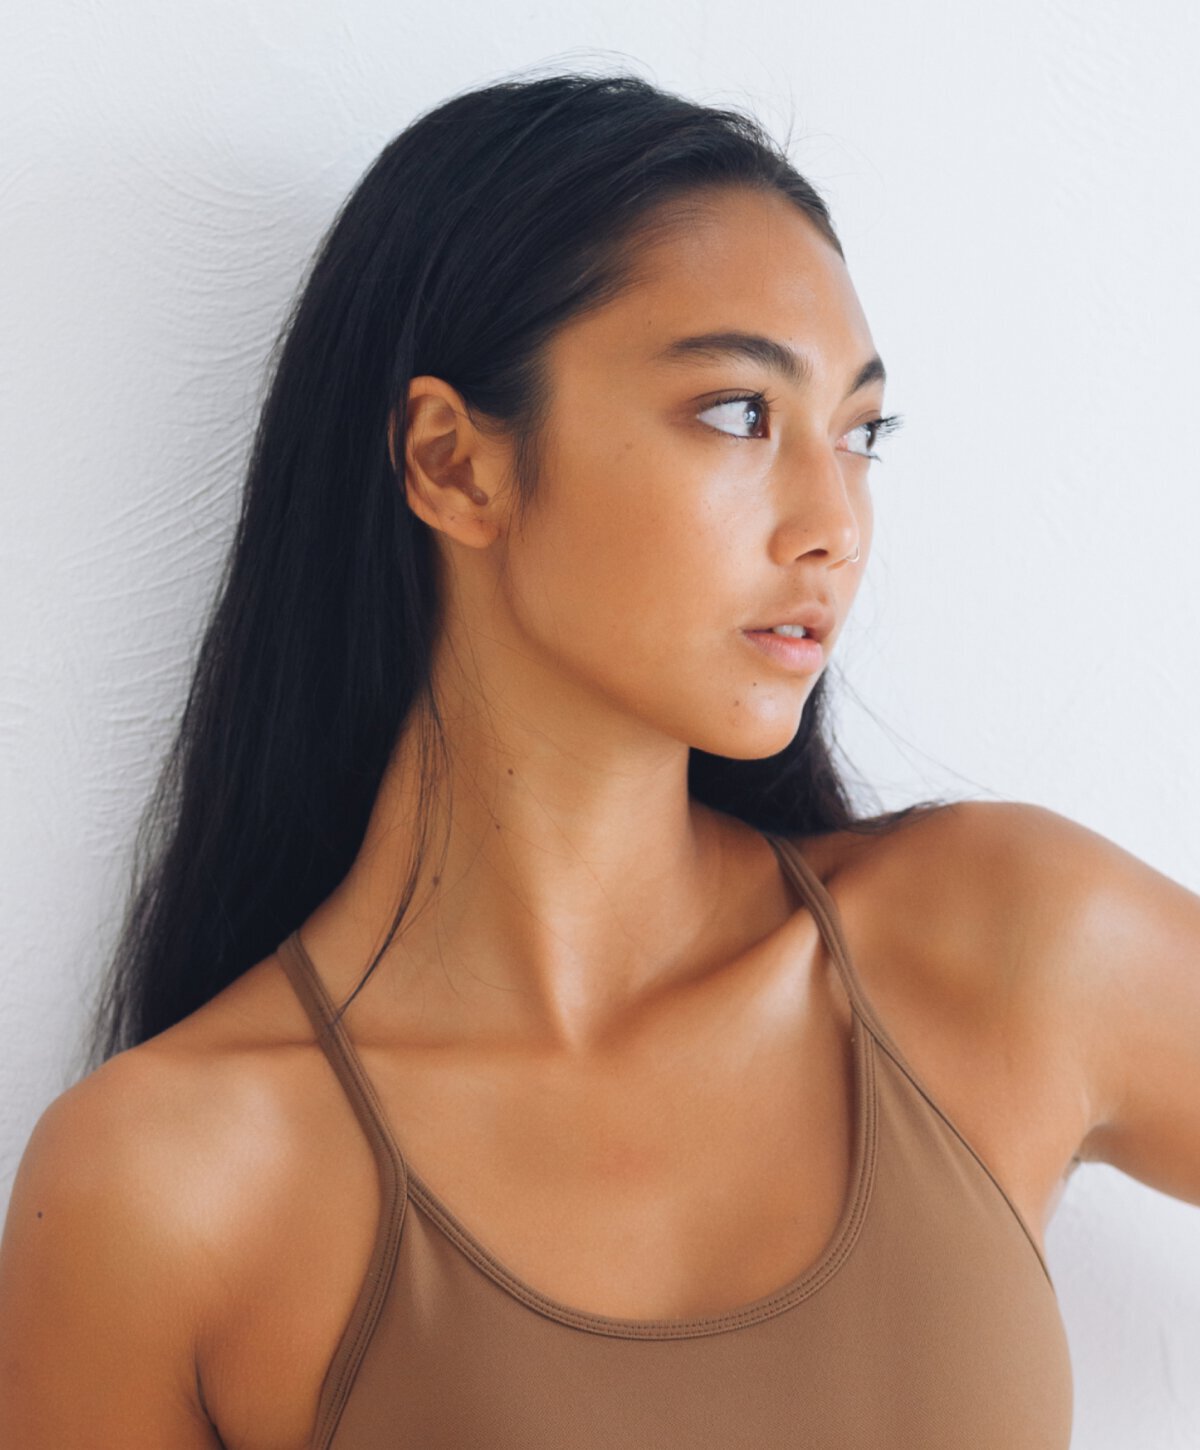 Ponte Vedra Beach Neck Liposuction model in a brown top